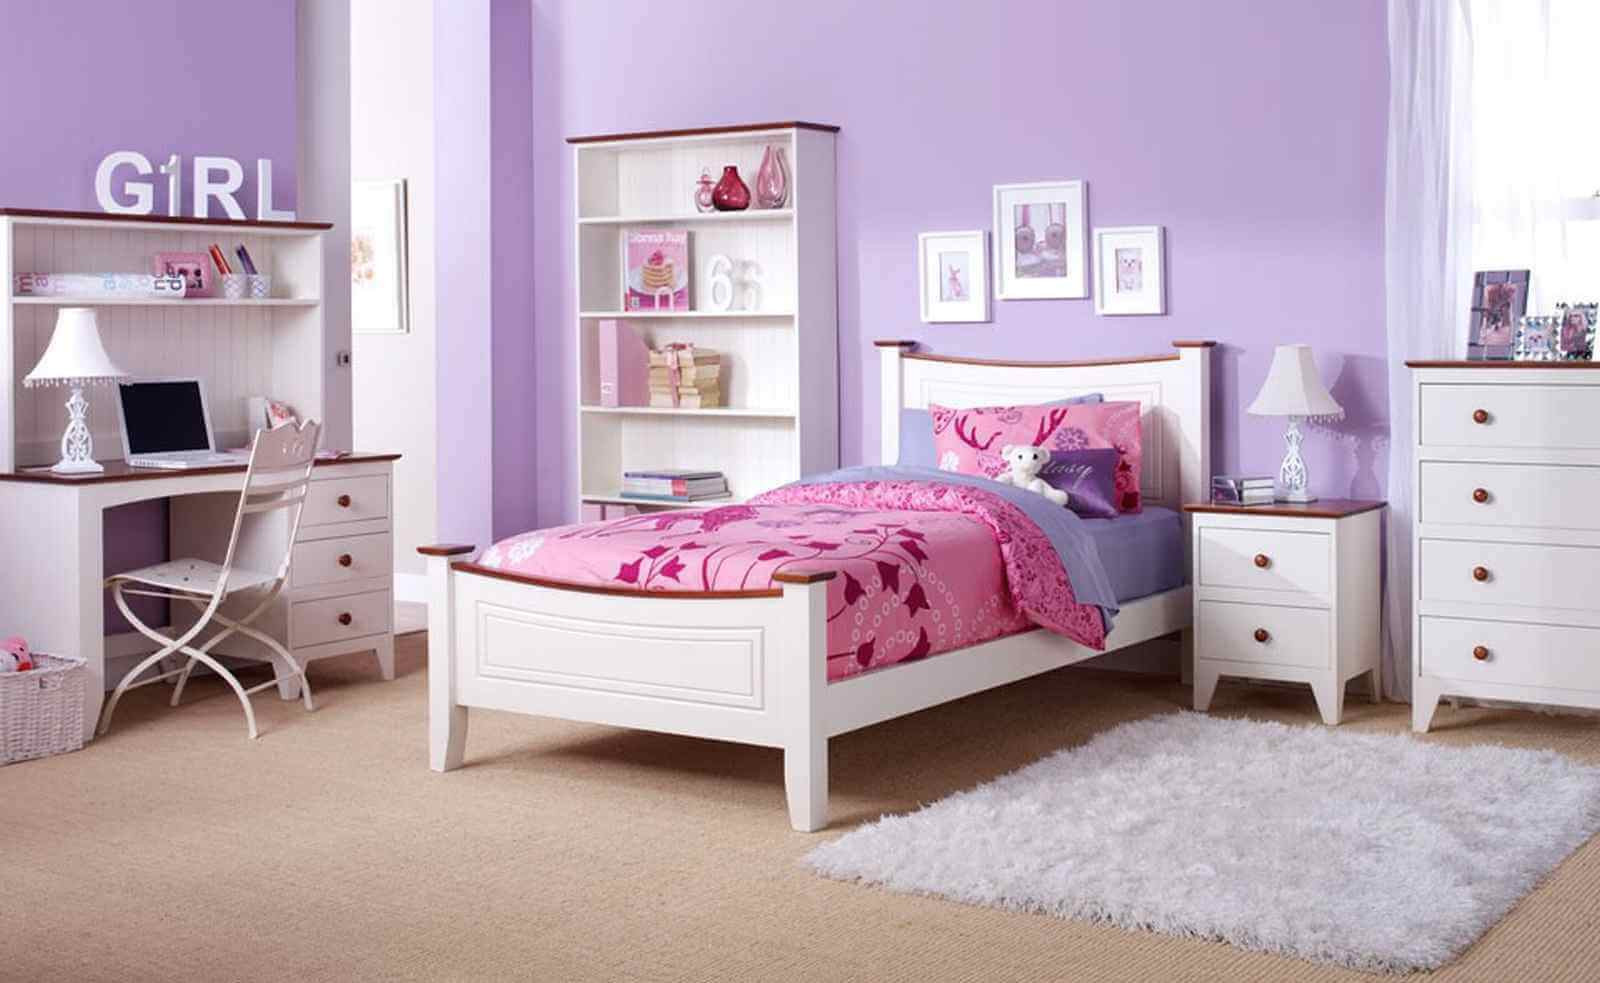 Girls Bedroom Furnature
 Ideas for Decorating a Girl Bedroom Furniture TheyDesign